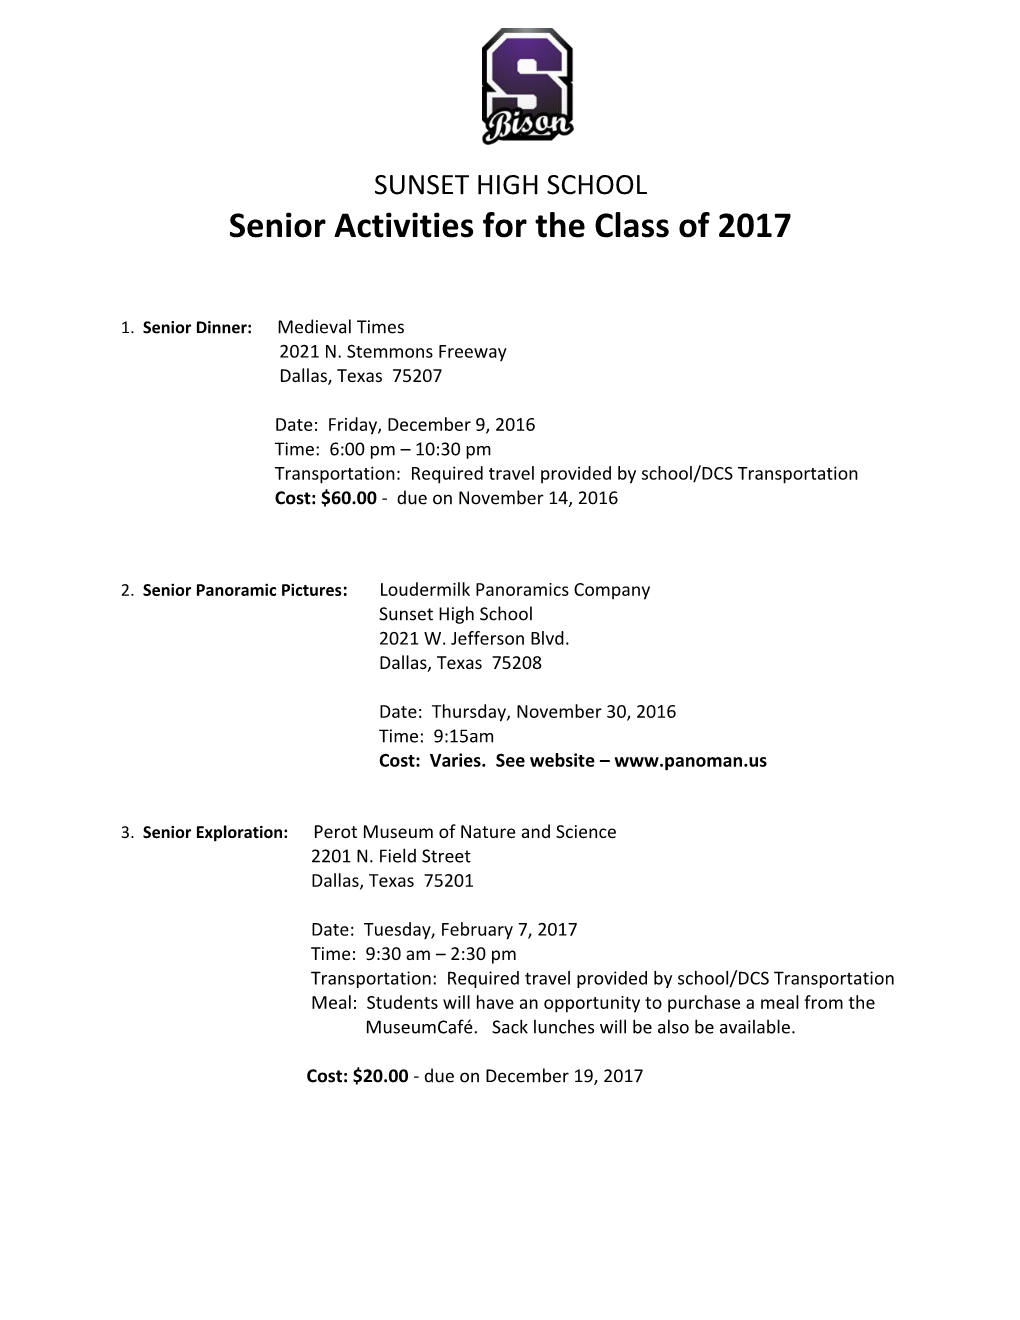 Senior Activities for the Class of 2017